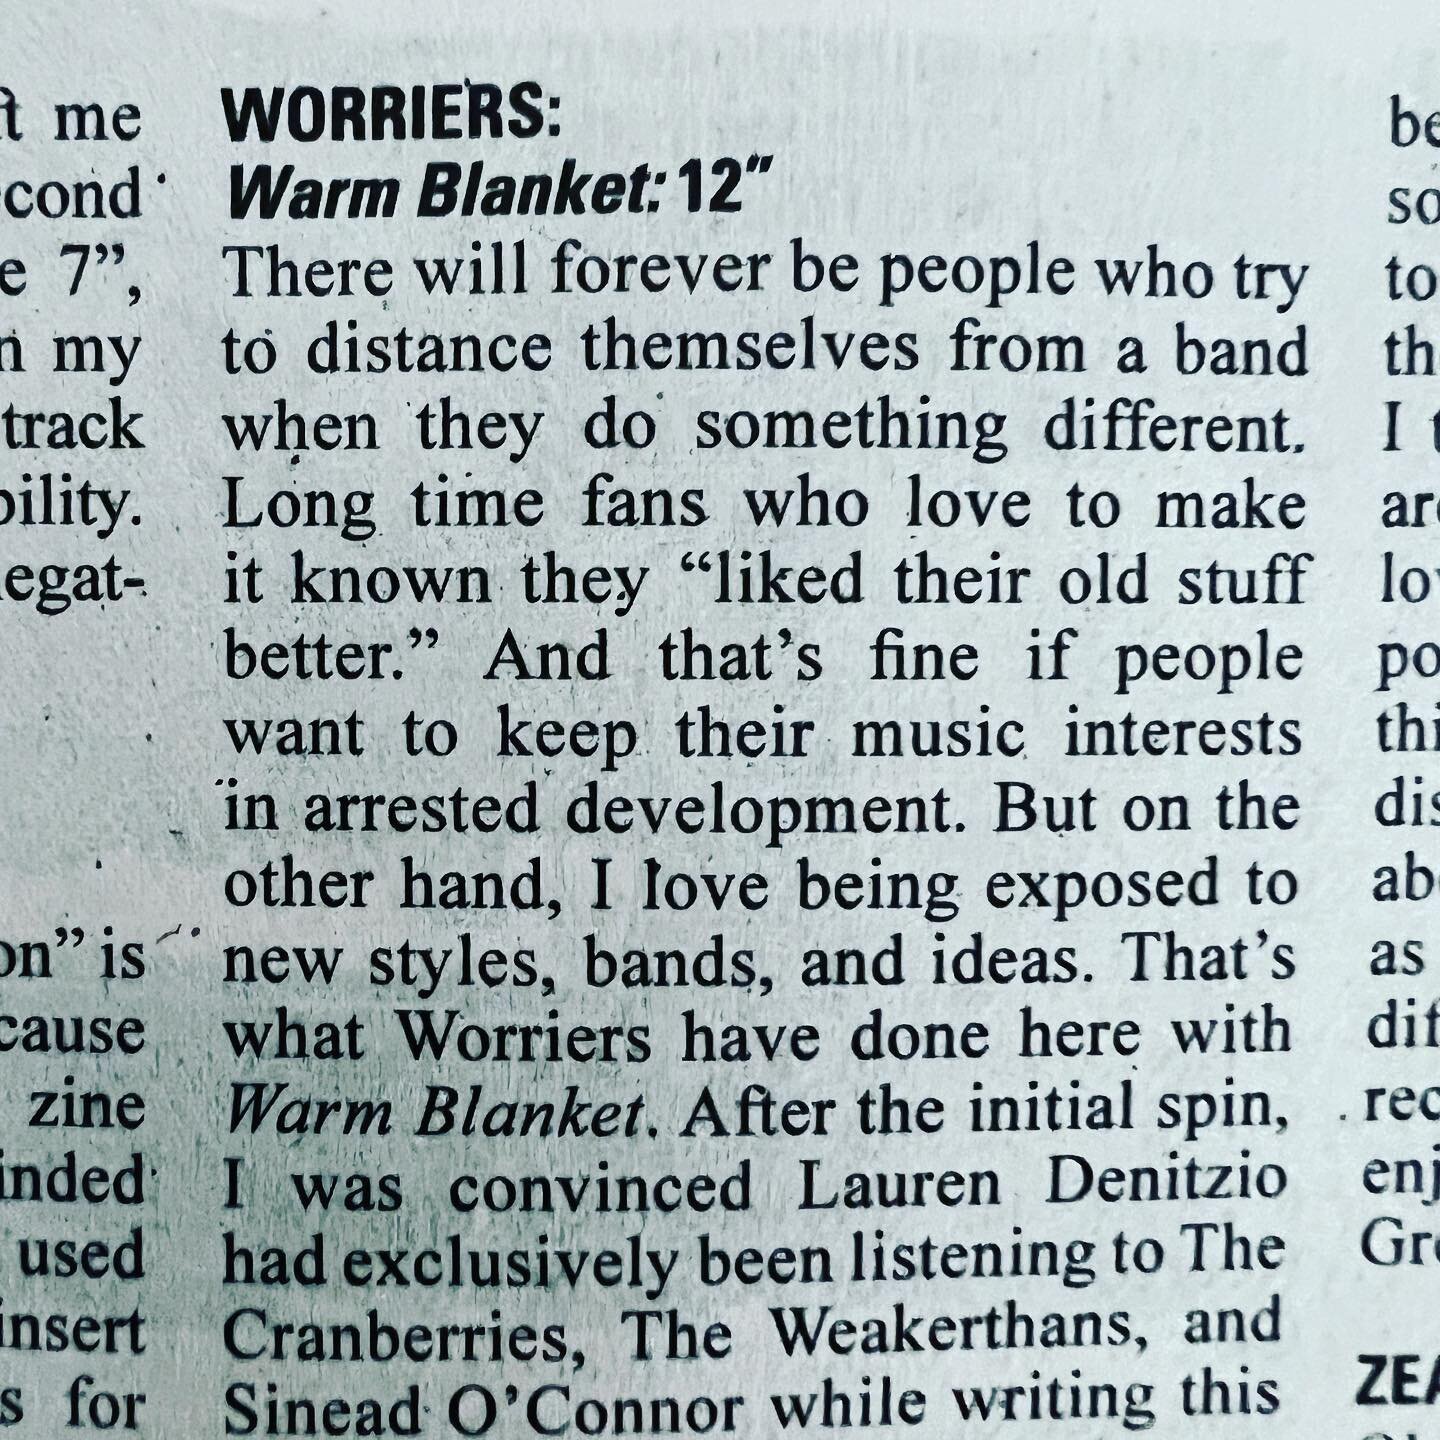 Thanks to @kayluh_alison for this very kind review of Warm Blanket in the most recent issue of @razorcake_zine - a magazine whose ethos is &ldquo;we do our part&rdquo; which is all you can hope for, really. Non profit punk rock. Thanks for listening 